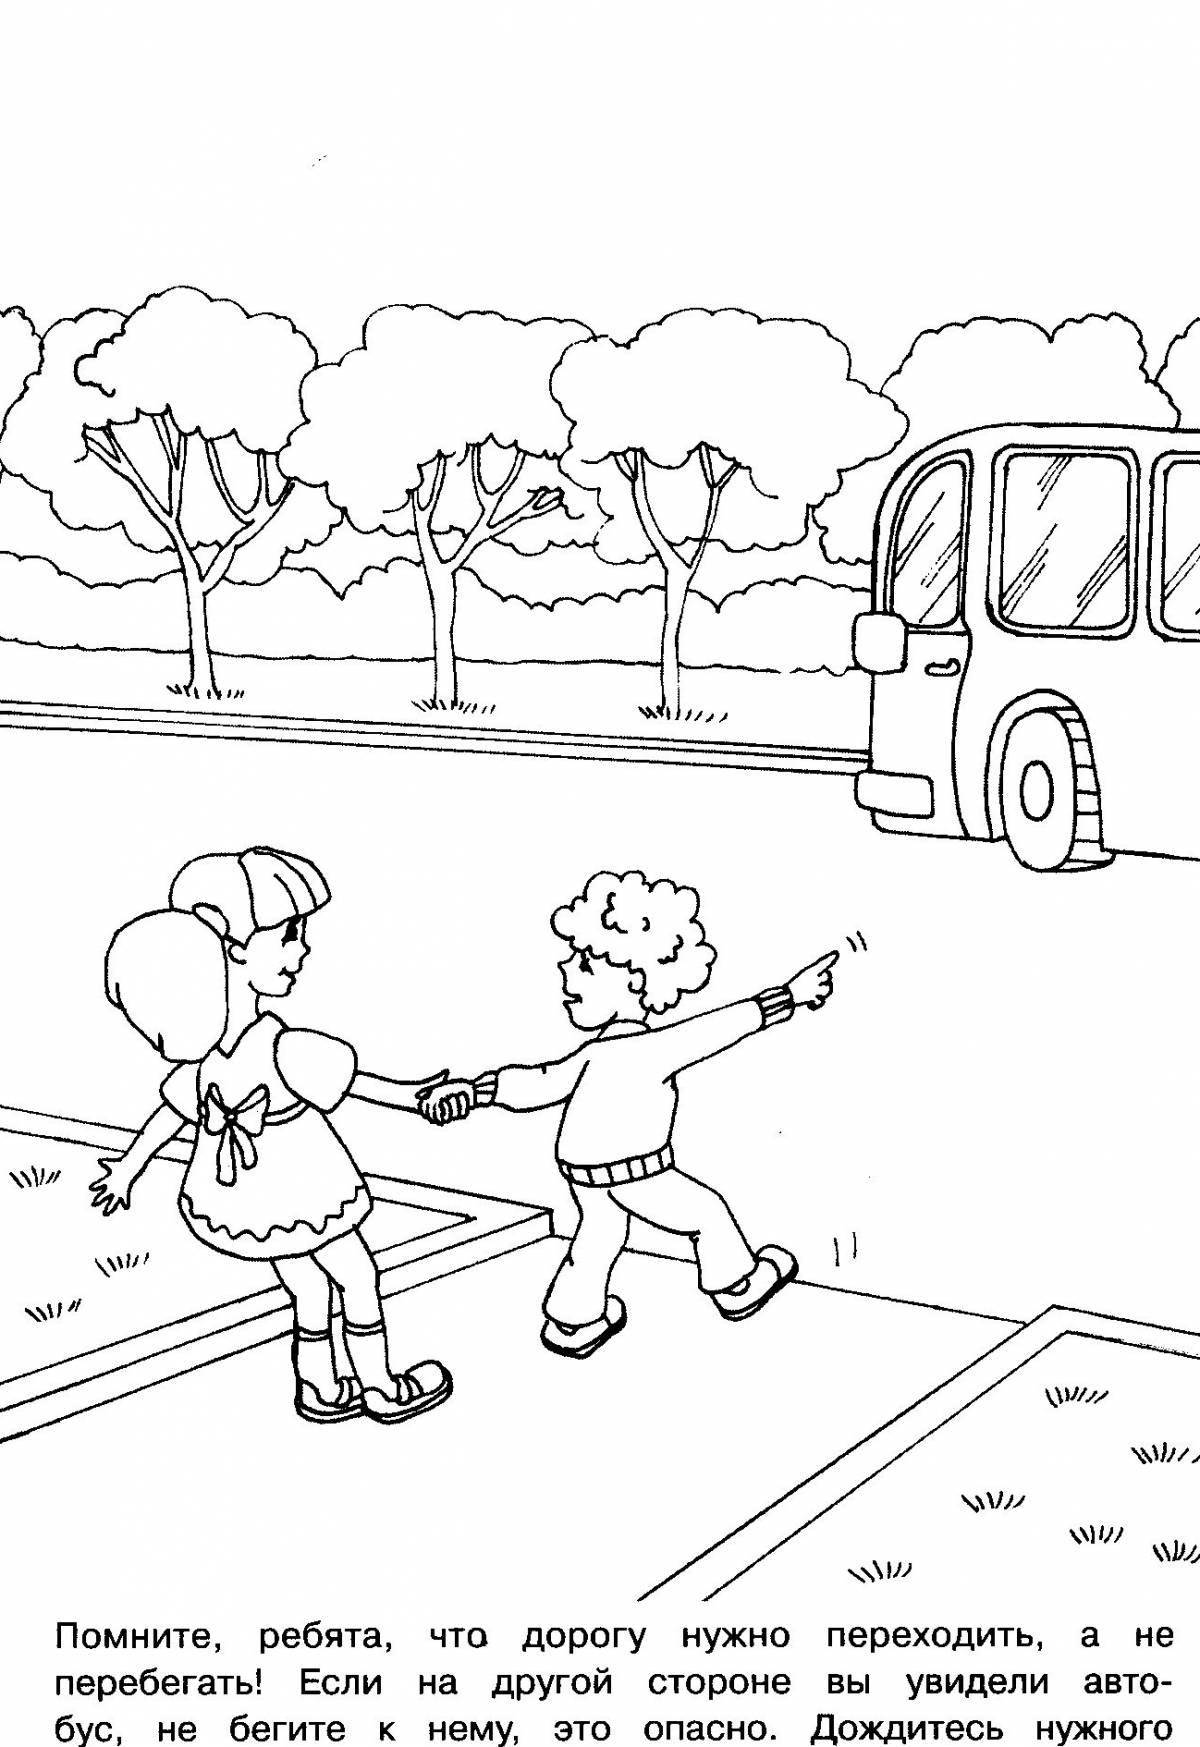 Colorful road home coloring page